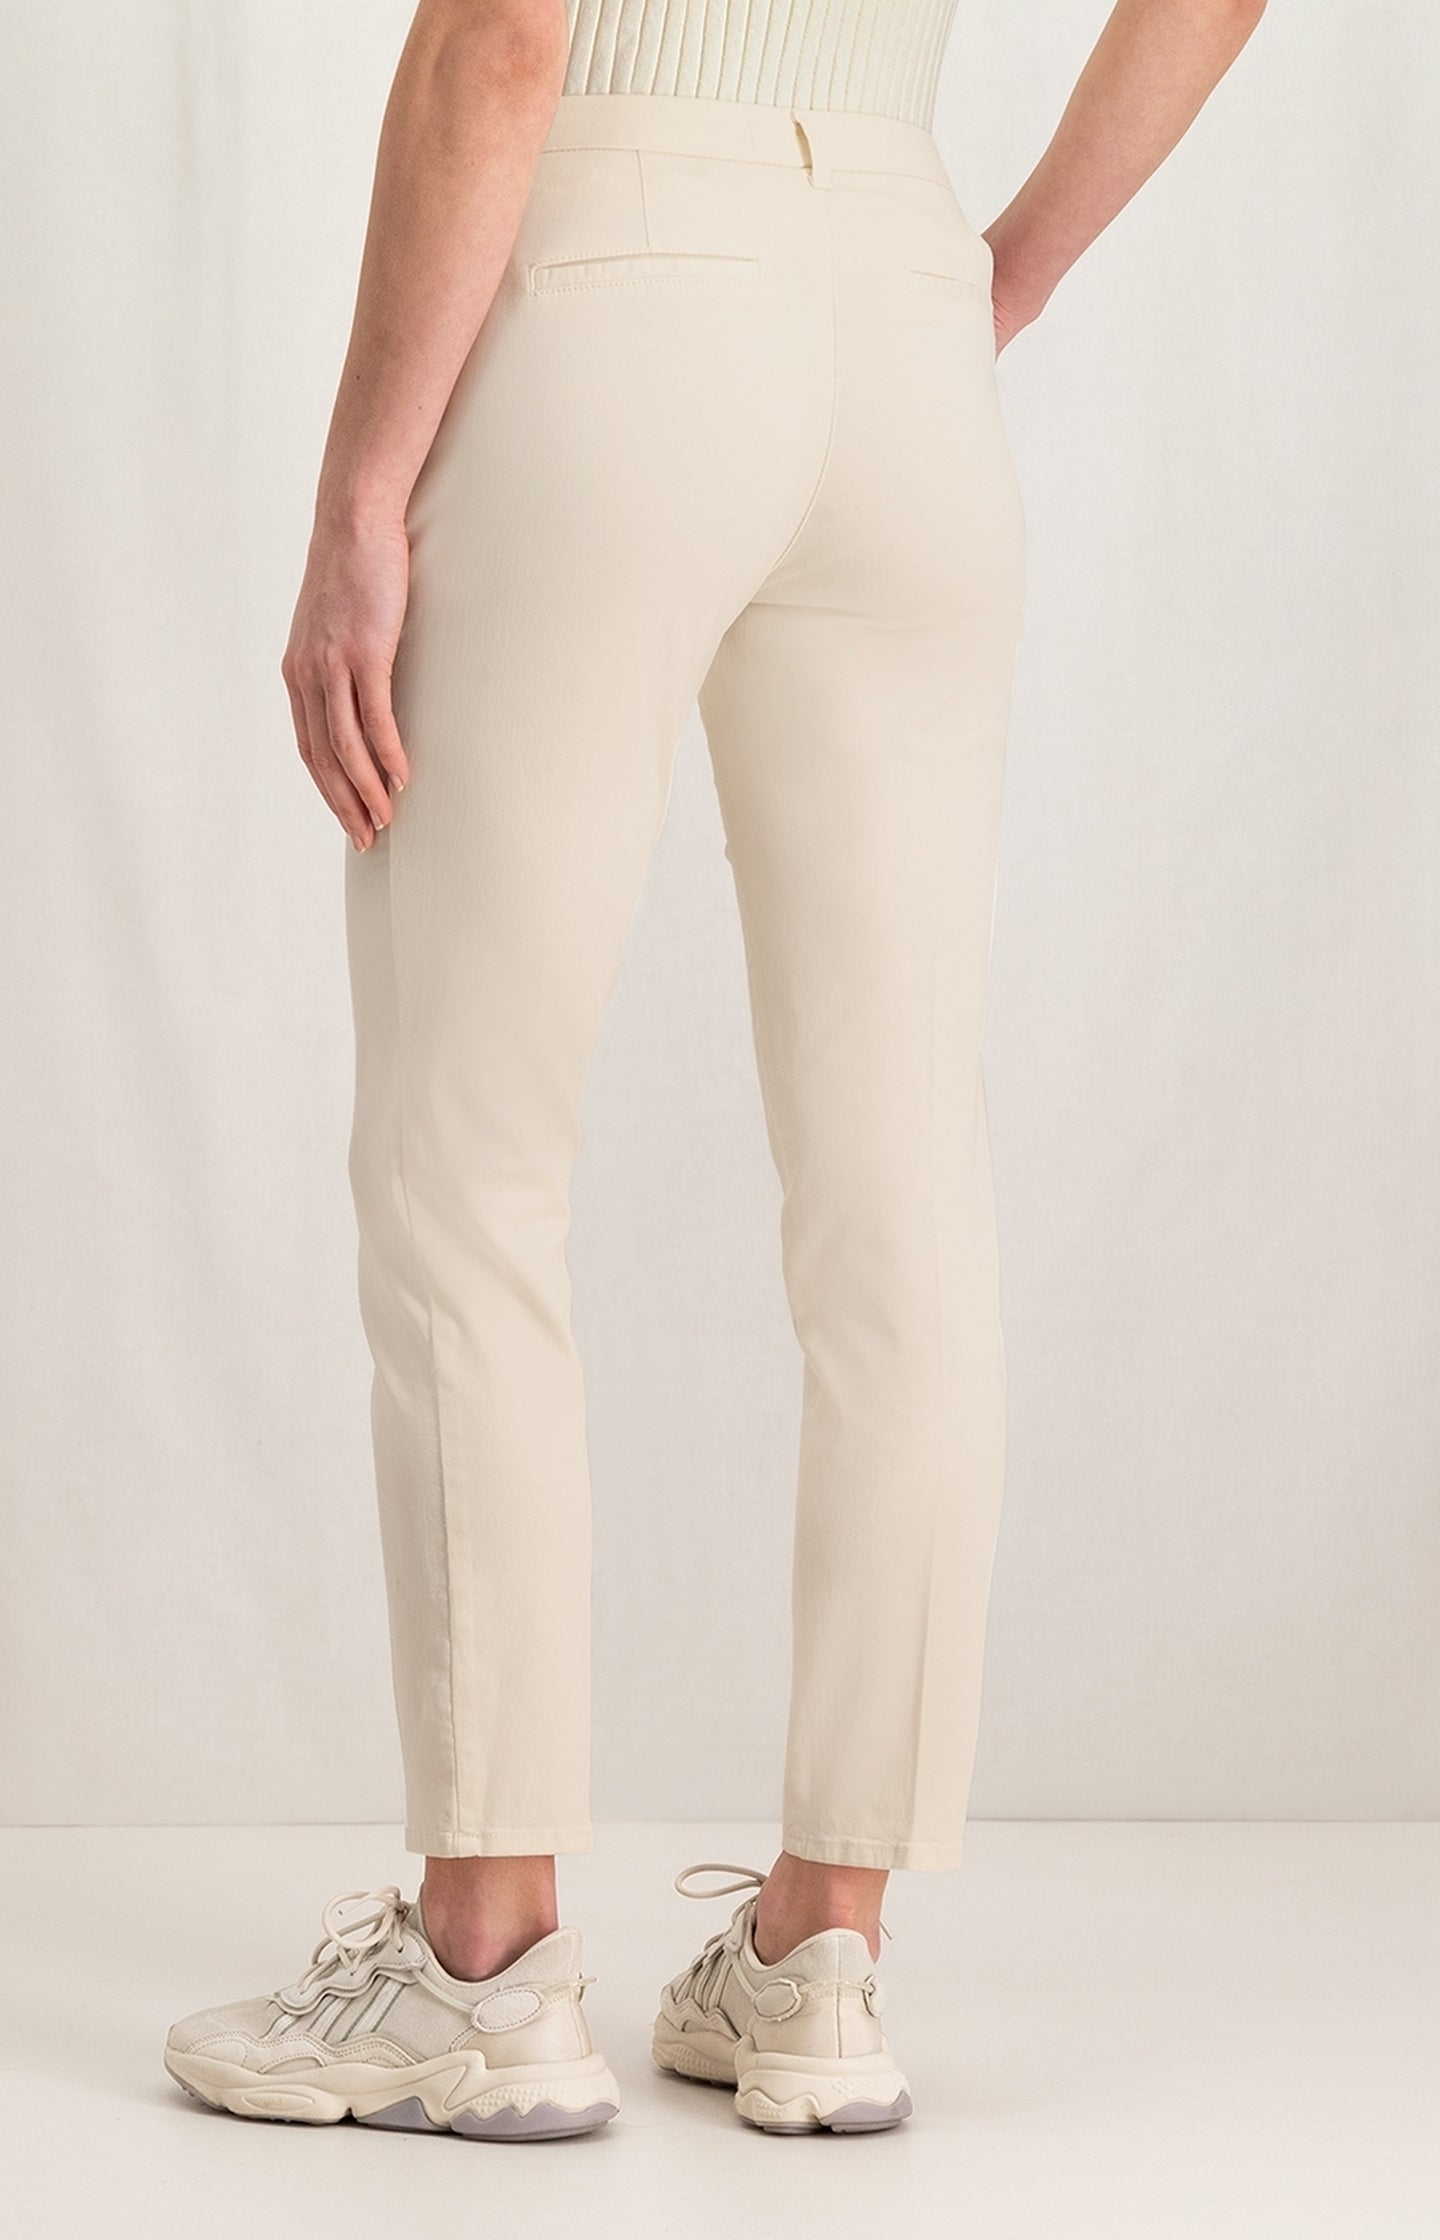 Basic chino with straight leg, side pockets and zip fly